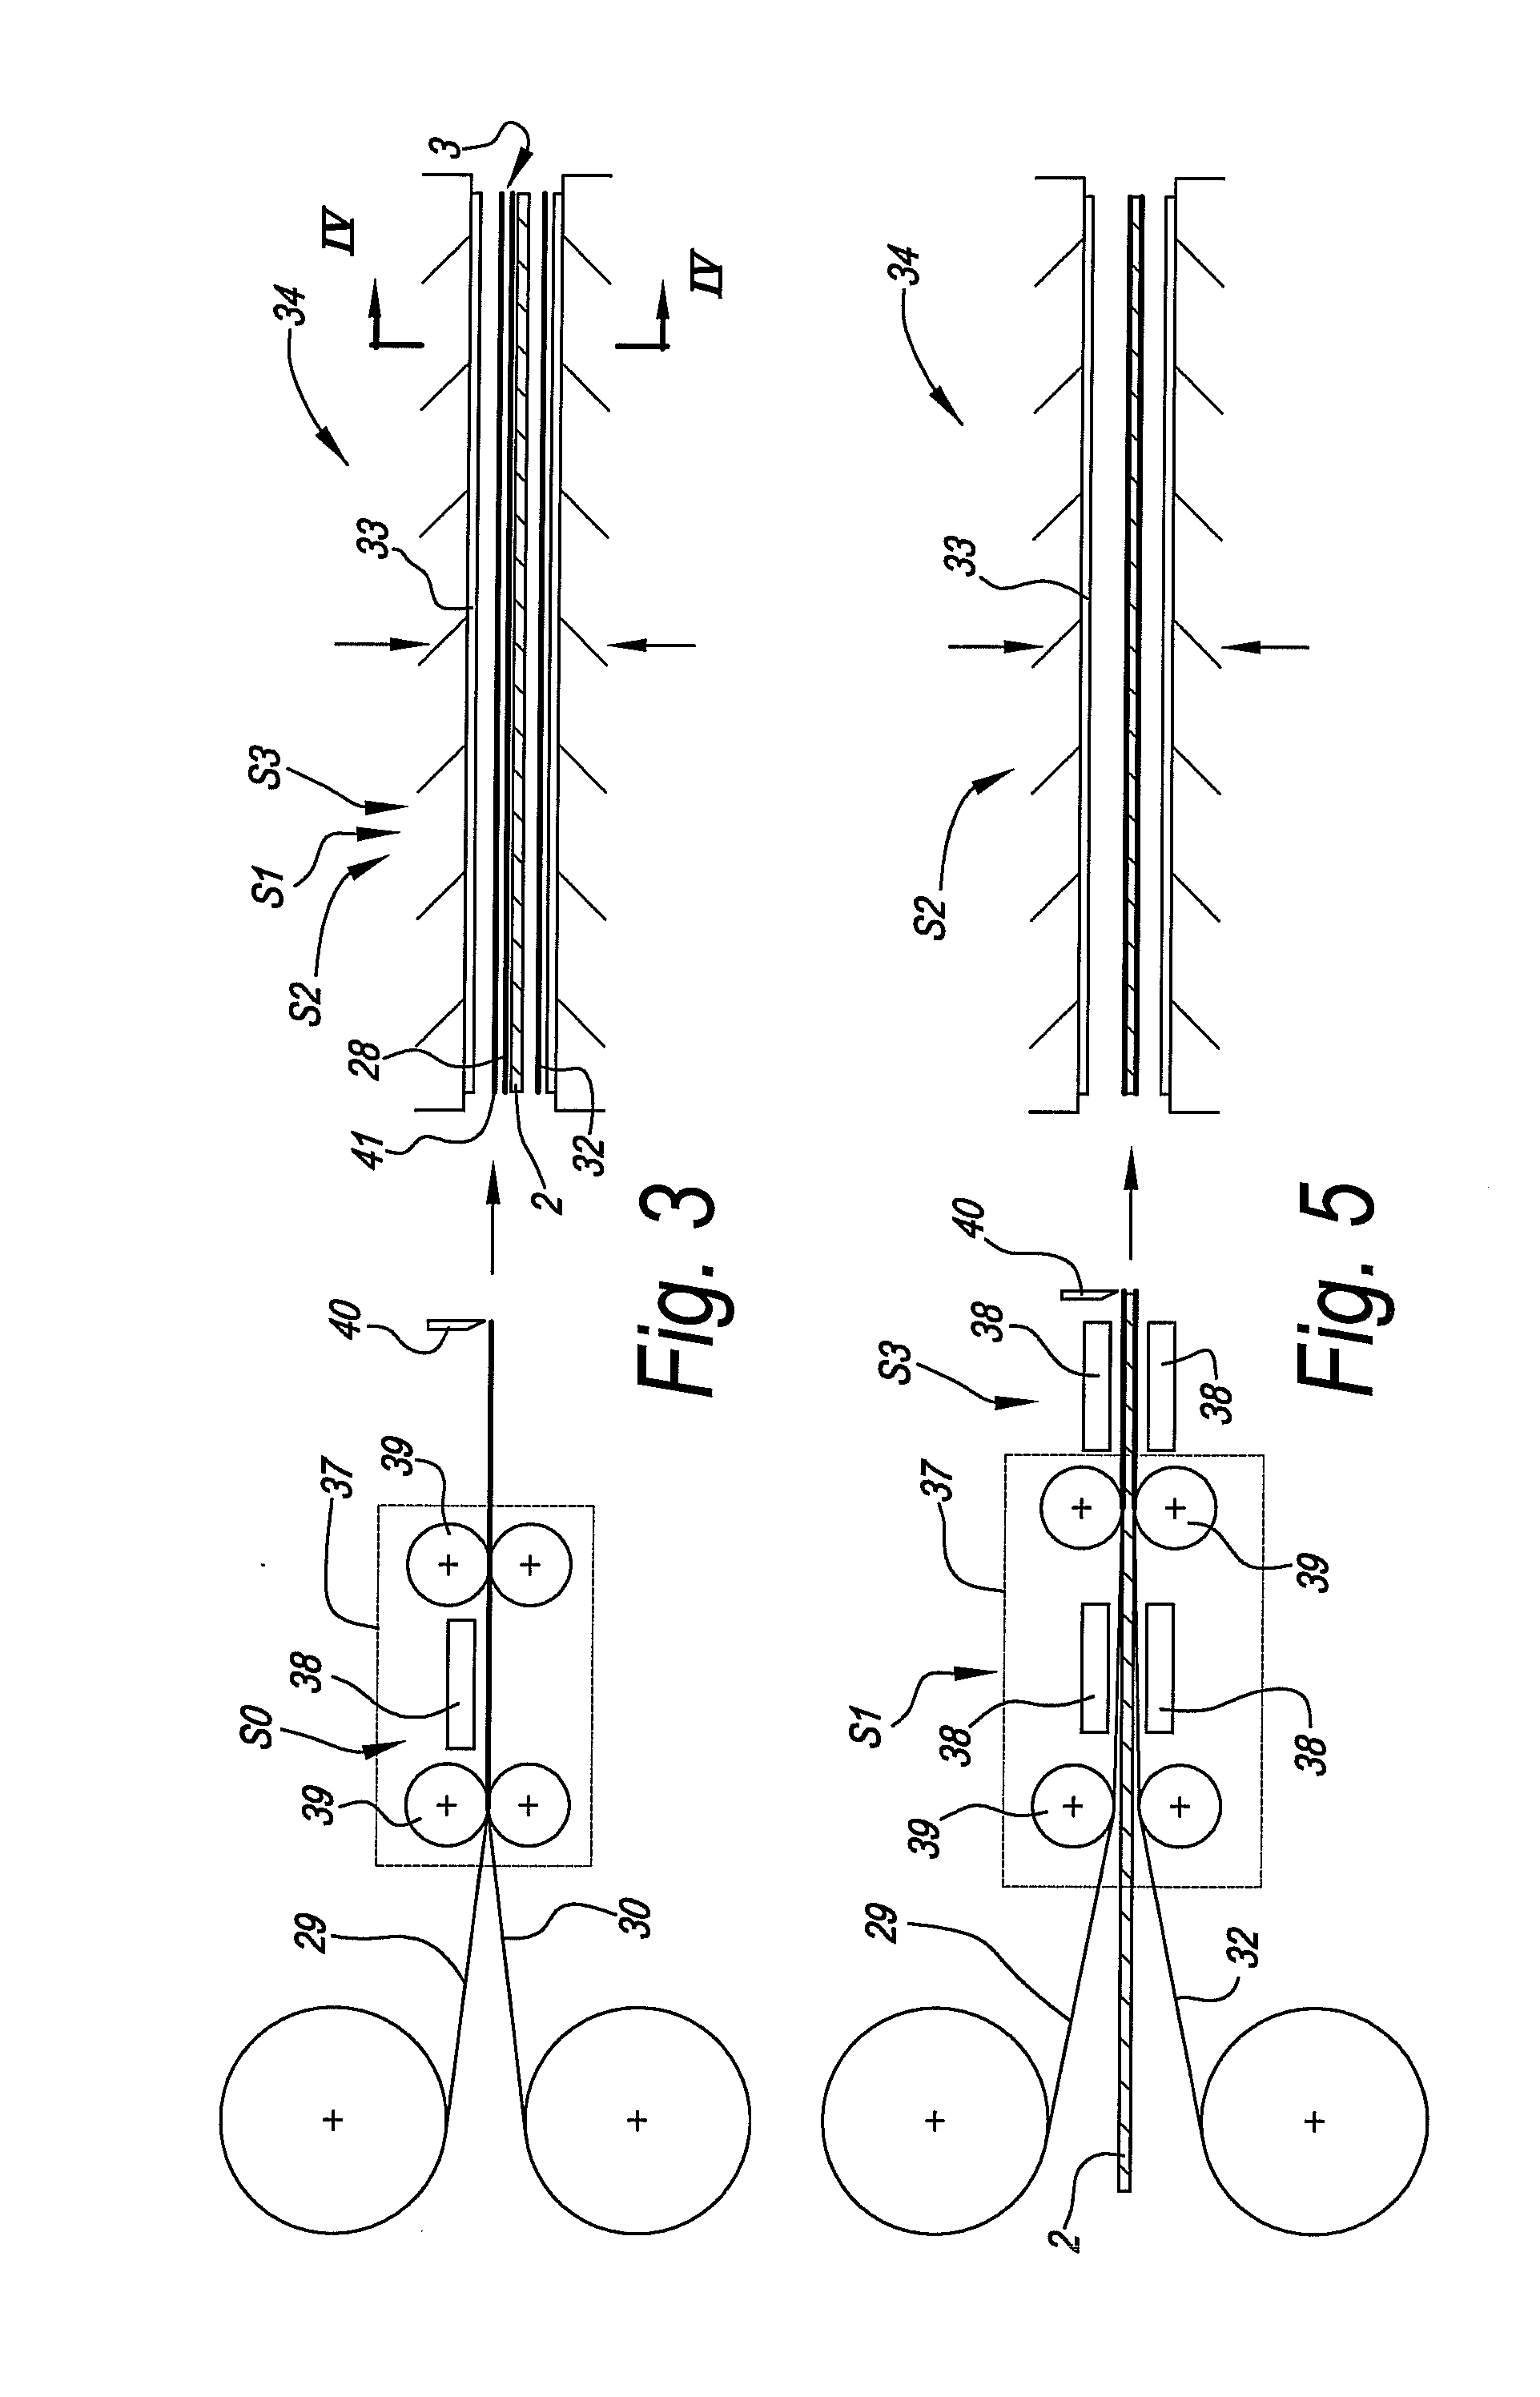 Floor panel and methods for manufacturing floor panels